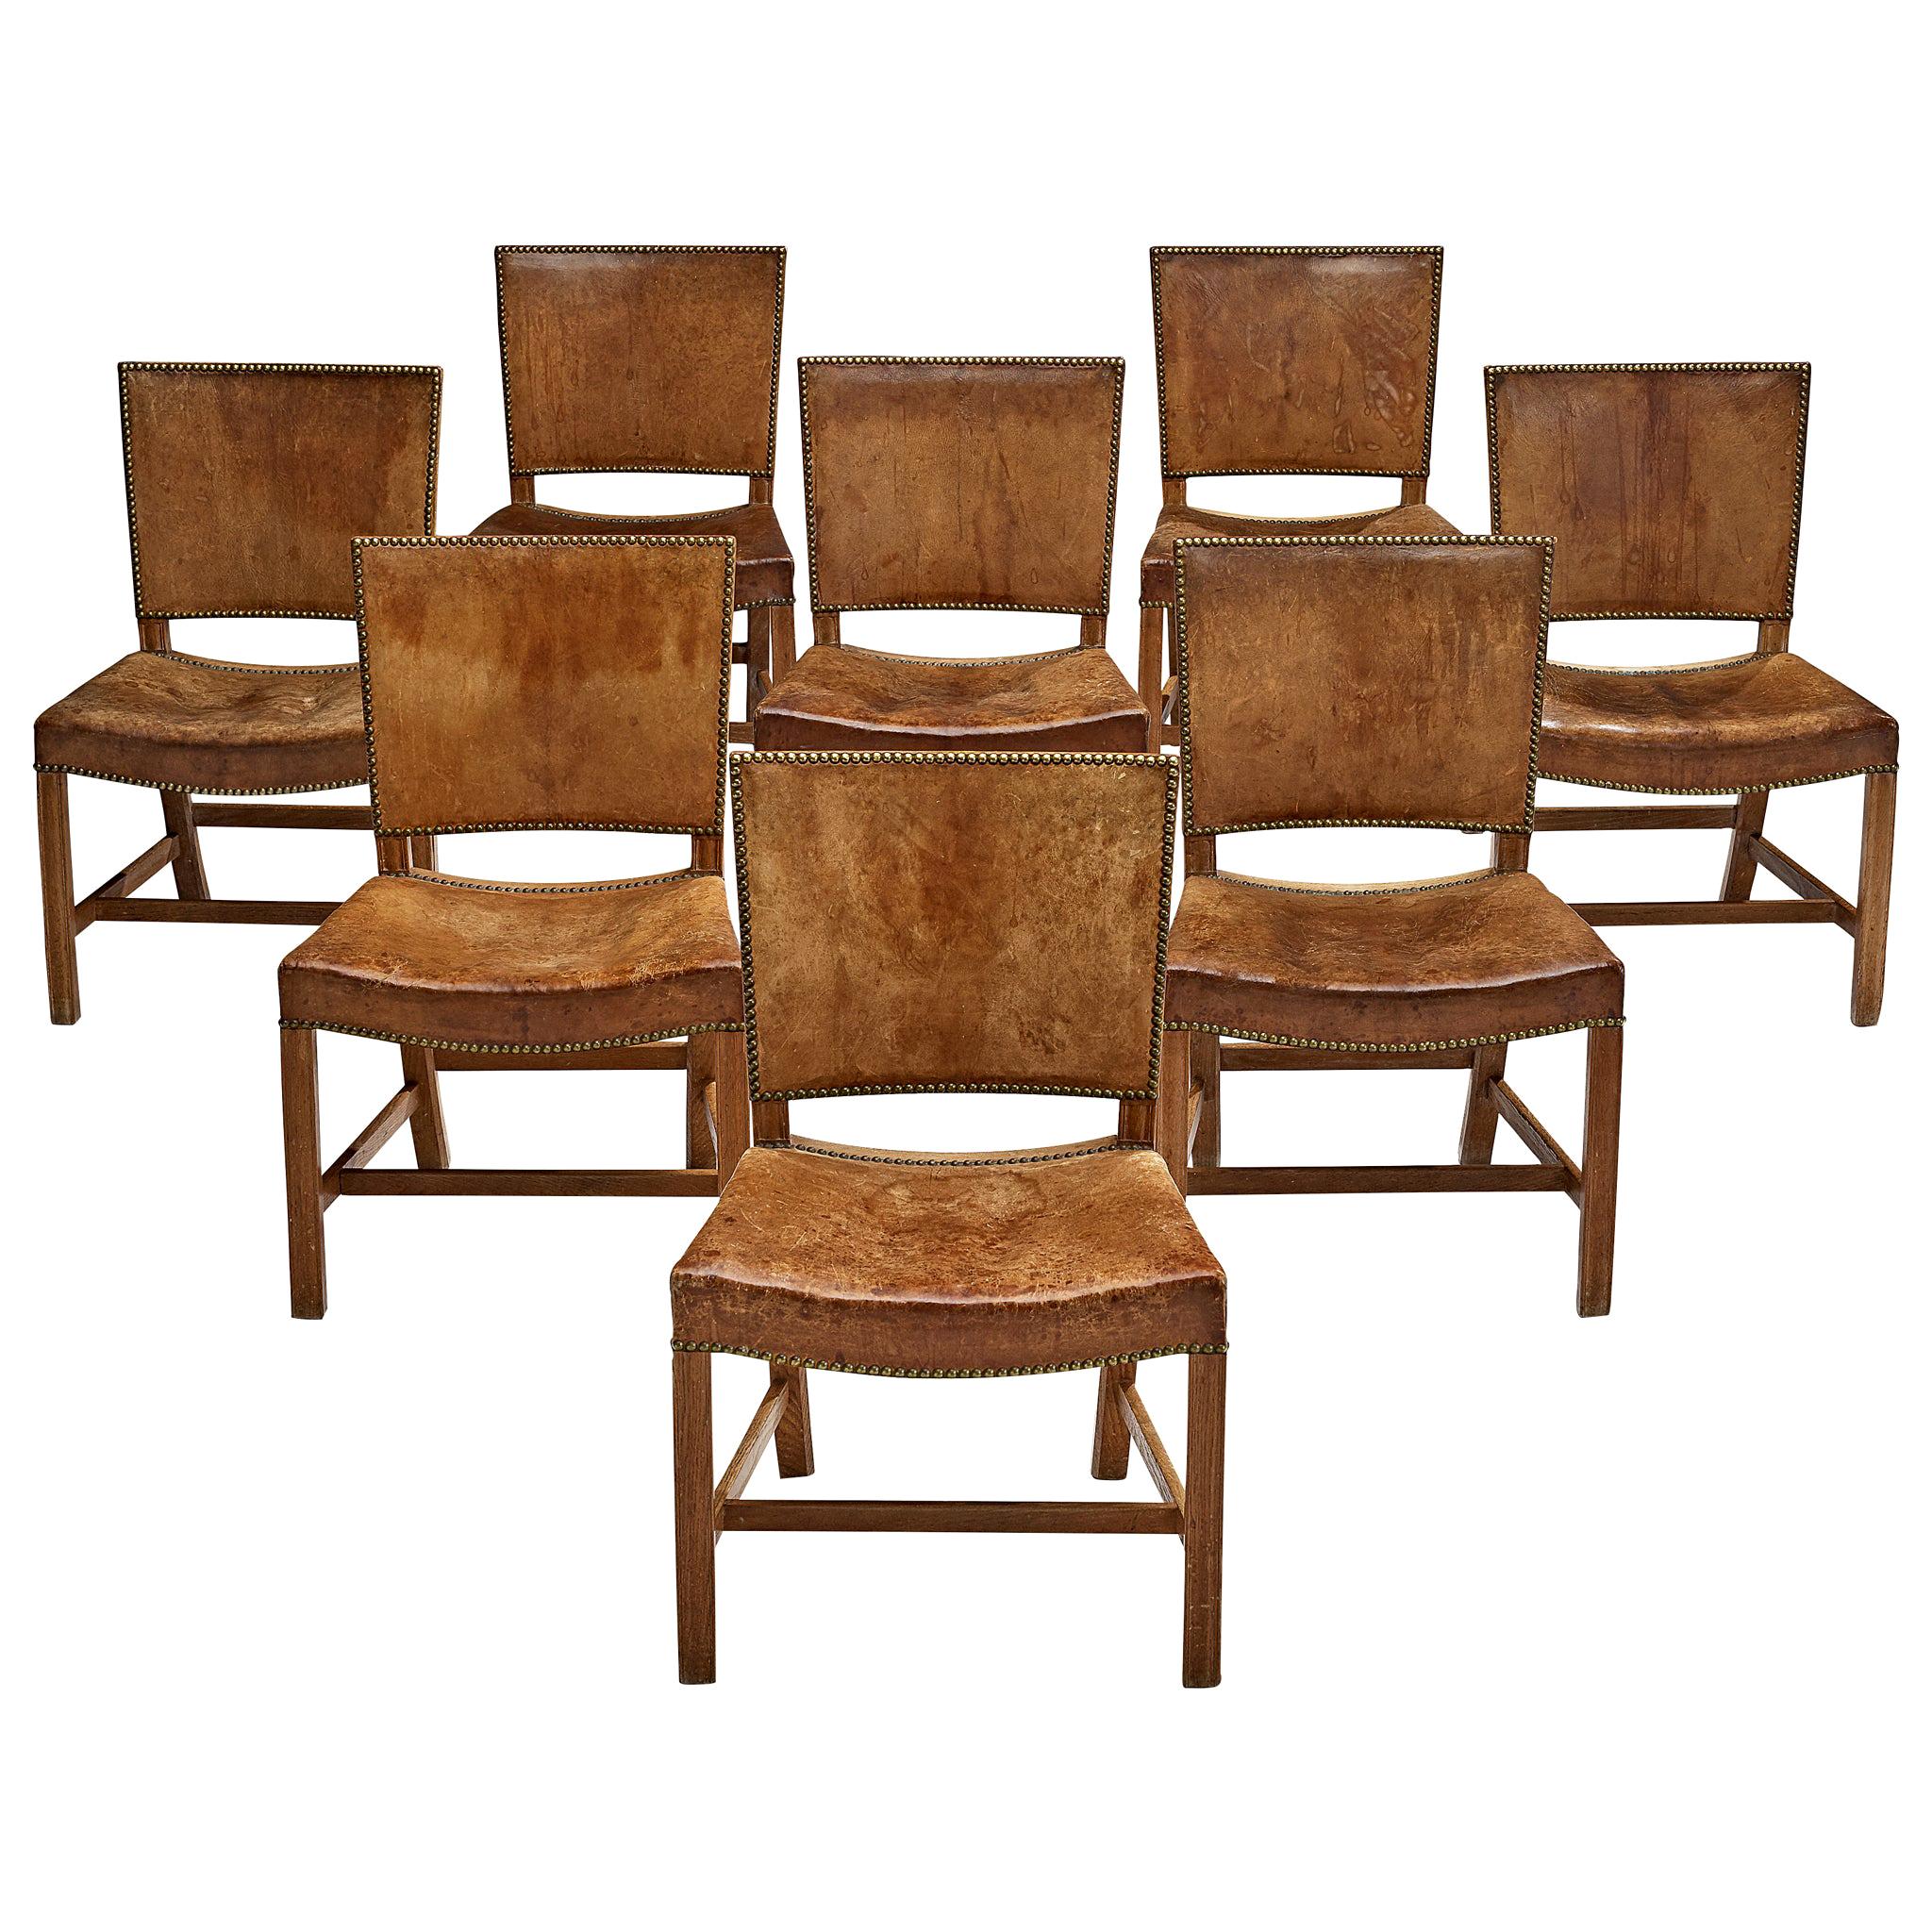 8 Early 'Red Chairs' in Original Niger Leather by Kaare Klint for Rud Rasmussen